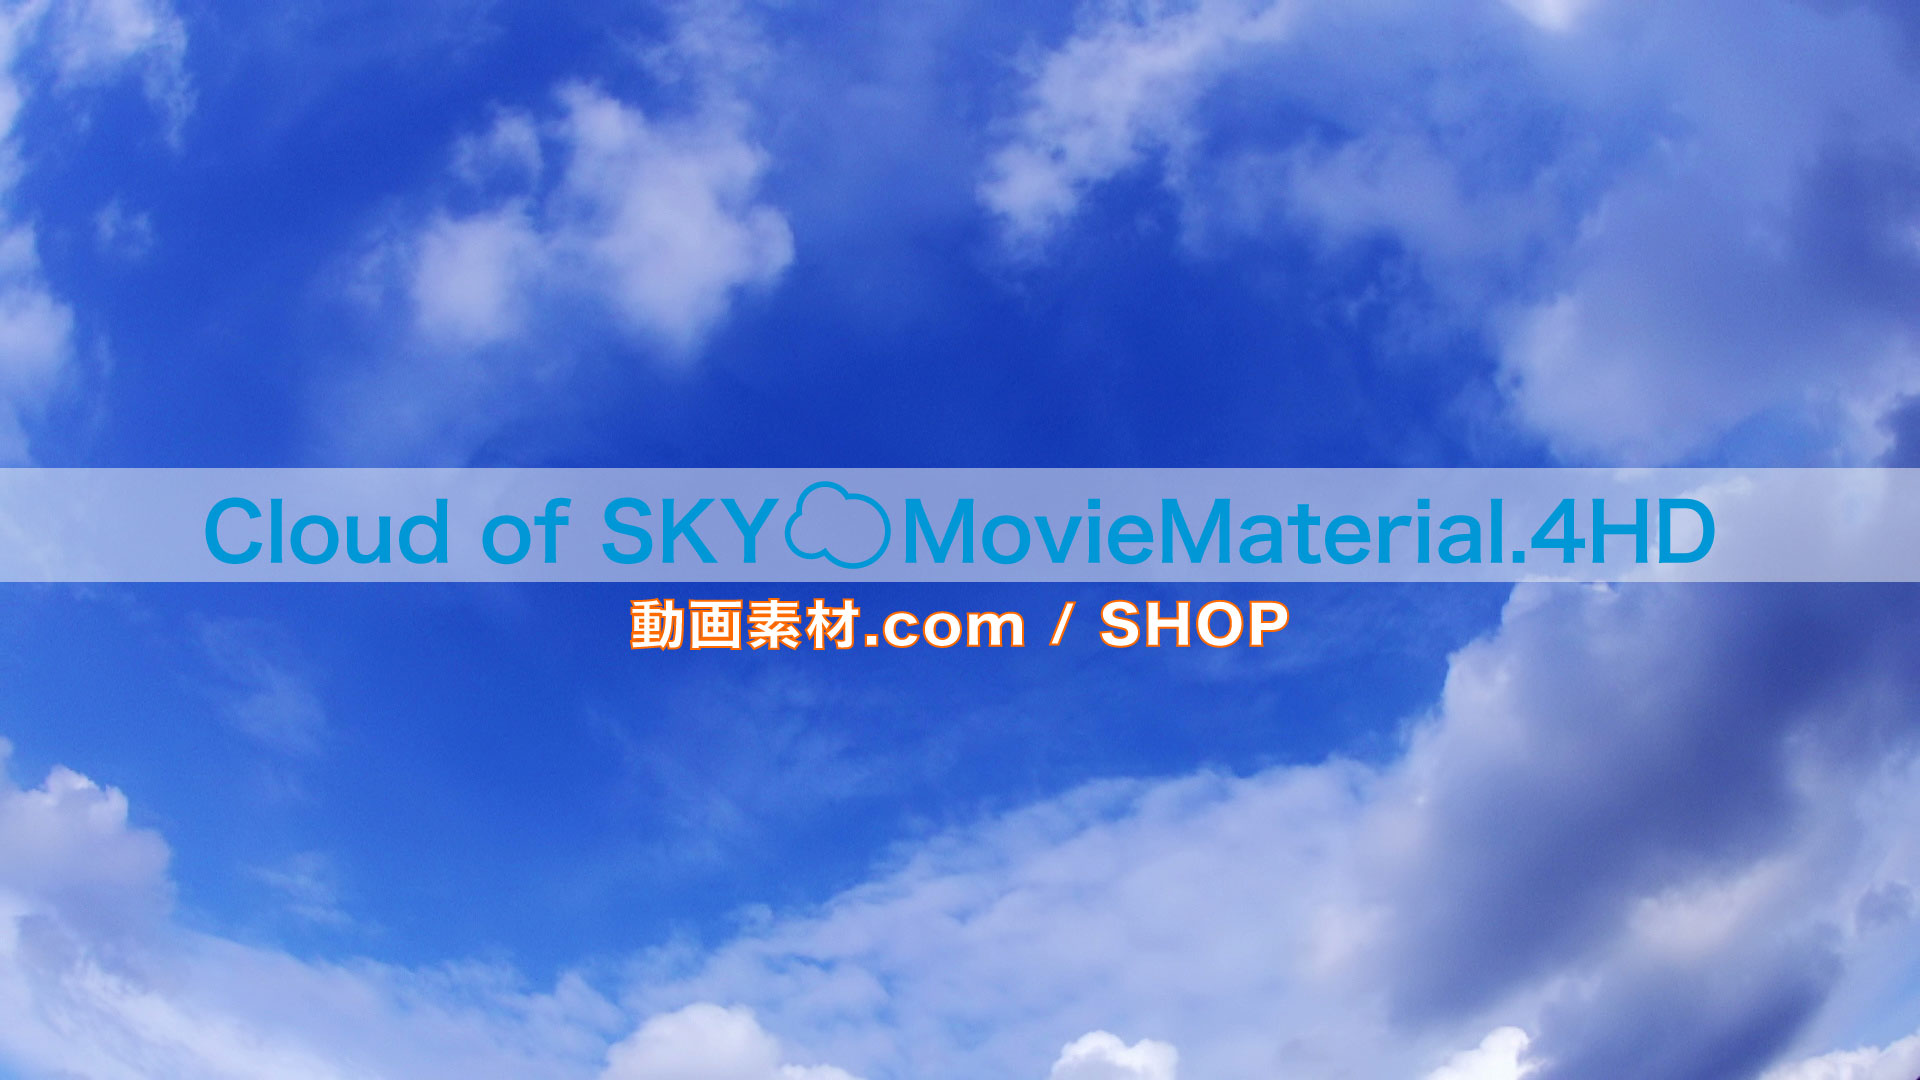 【Cloud of SKY MovieMaterial.HDSET】 ロイヤリティフリー フルハイビジョン動画素材集 Image.16